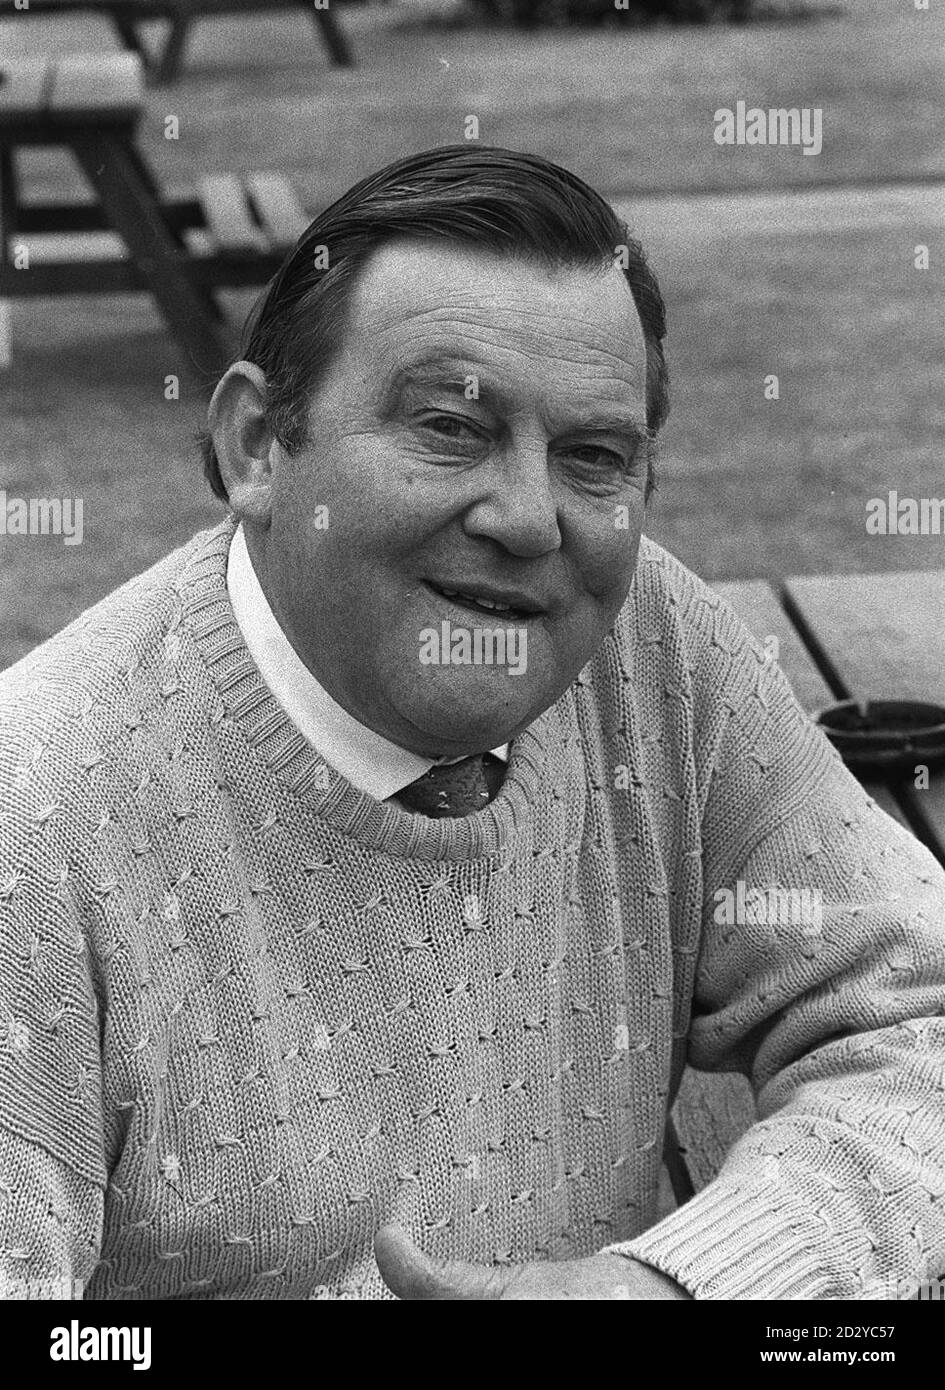 ACTOR AND COMEDIAN TERRY SCOTT  * 29/4/01: A plaque dedicated to him was one of those unveiled as part of the 40th anniversary of the classic Carry On films of which he starred in seven. Other plaques were unveiled in memory of other Carry On actors Bernard Bresslaw, who starred in 14 of the films, Kenneth Connor, who starred in 17 Carry Ons and Peter Butterworth, who starred in 16  at Pinewood Studios, Hertfordshire. A special surprise plaque was also unveiled to the 87-year-old producer of all 31 Carry On films between 1958 and 1992, Peter Rogers.  Stock Photo